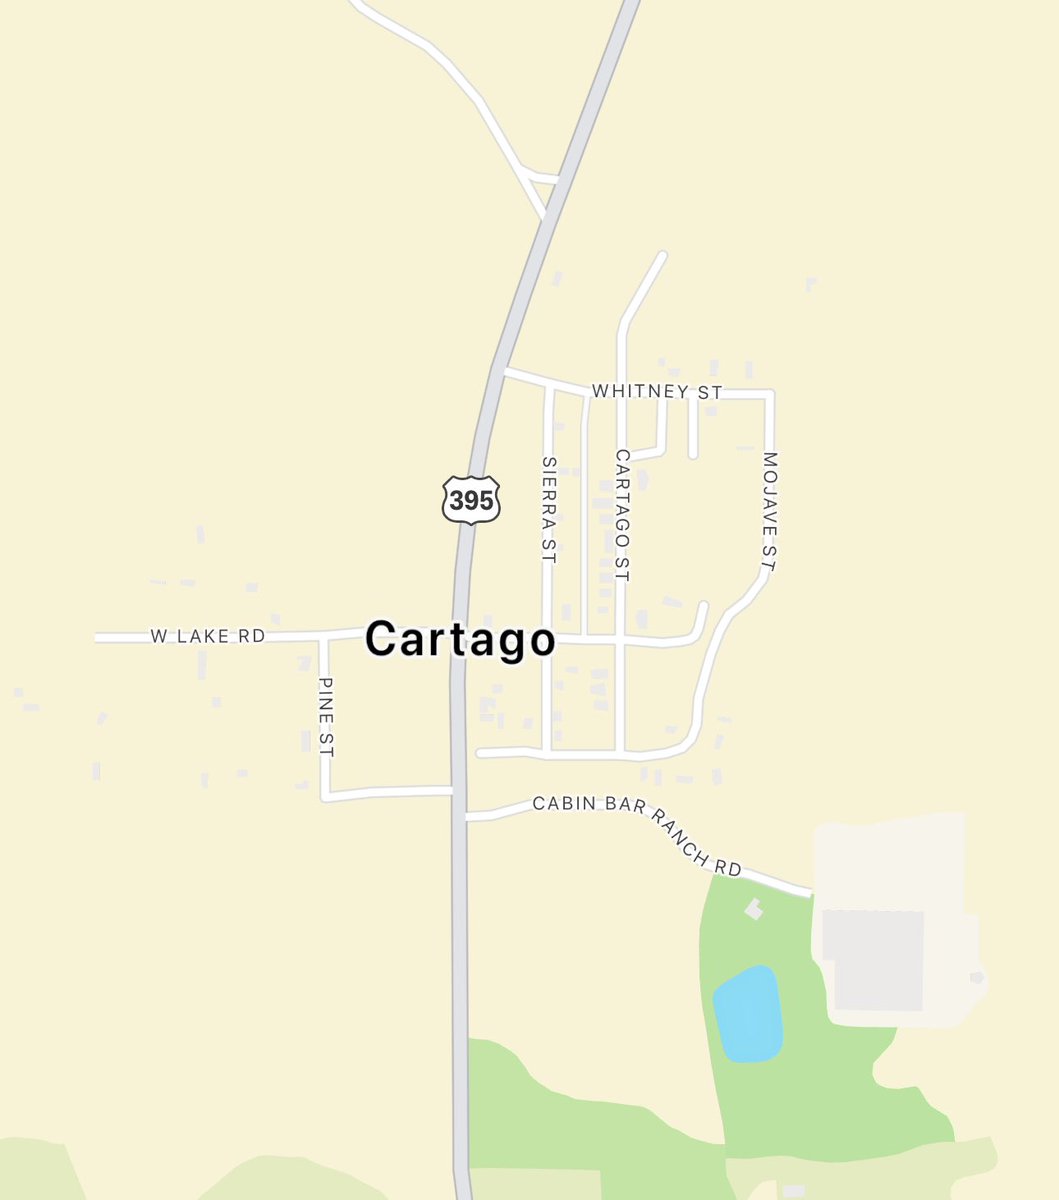 [New Incident] VEGETATION FIRE, HWY 395 in the community of Cartago, Inyo County. #CARTAGOIC reporting 15 acres, rapid rate of spread, heavy winds. Immediate evacuations Cabin Man Rd to Mt Whitney Rd including the Crystal Geyser plant. 9 Engines, 2 Crews, 1 water tender at scene…